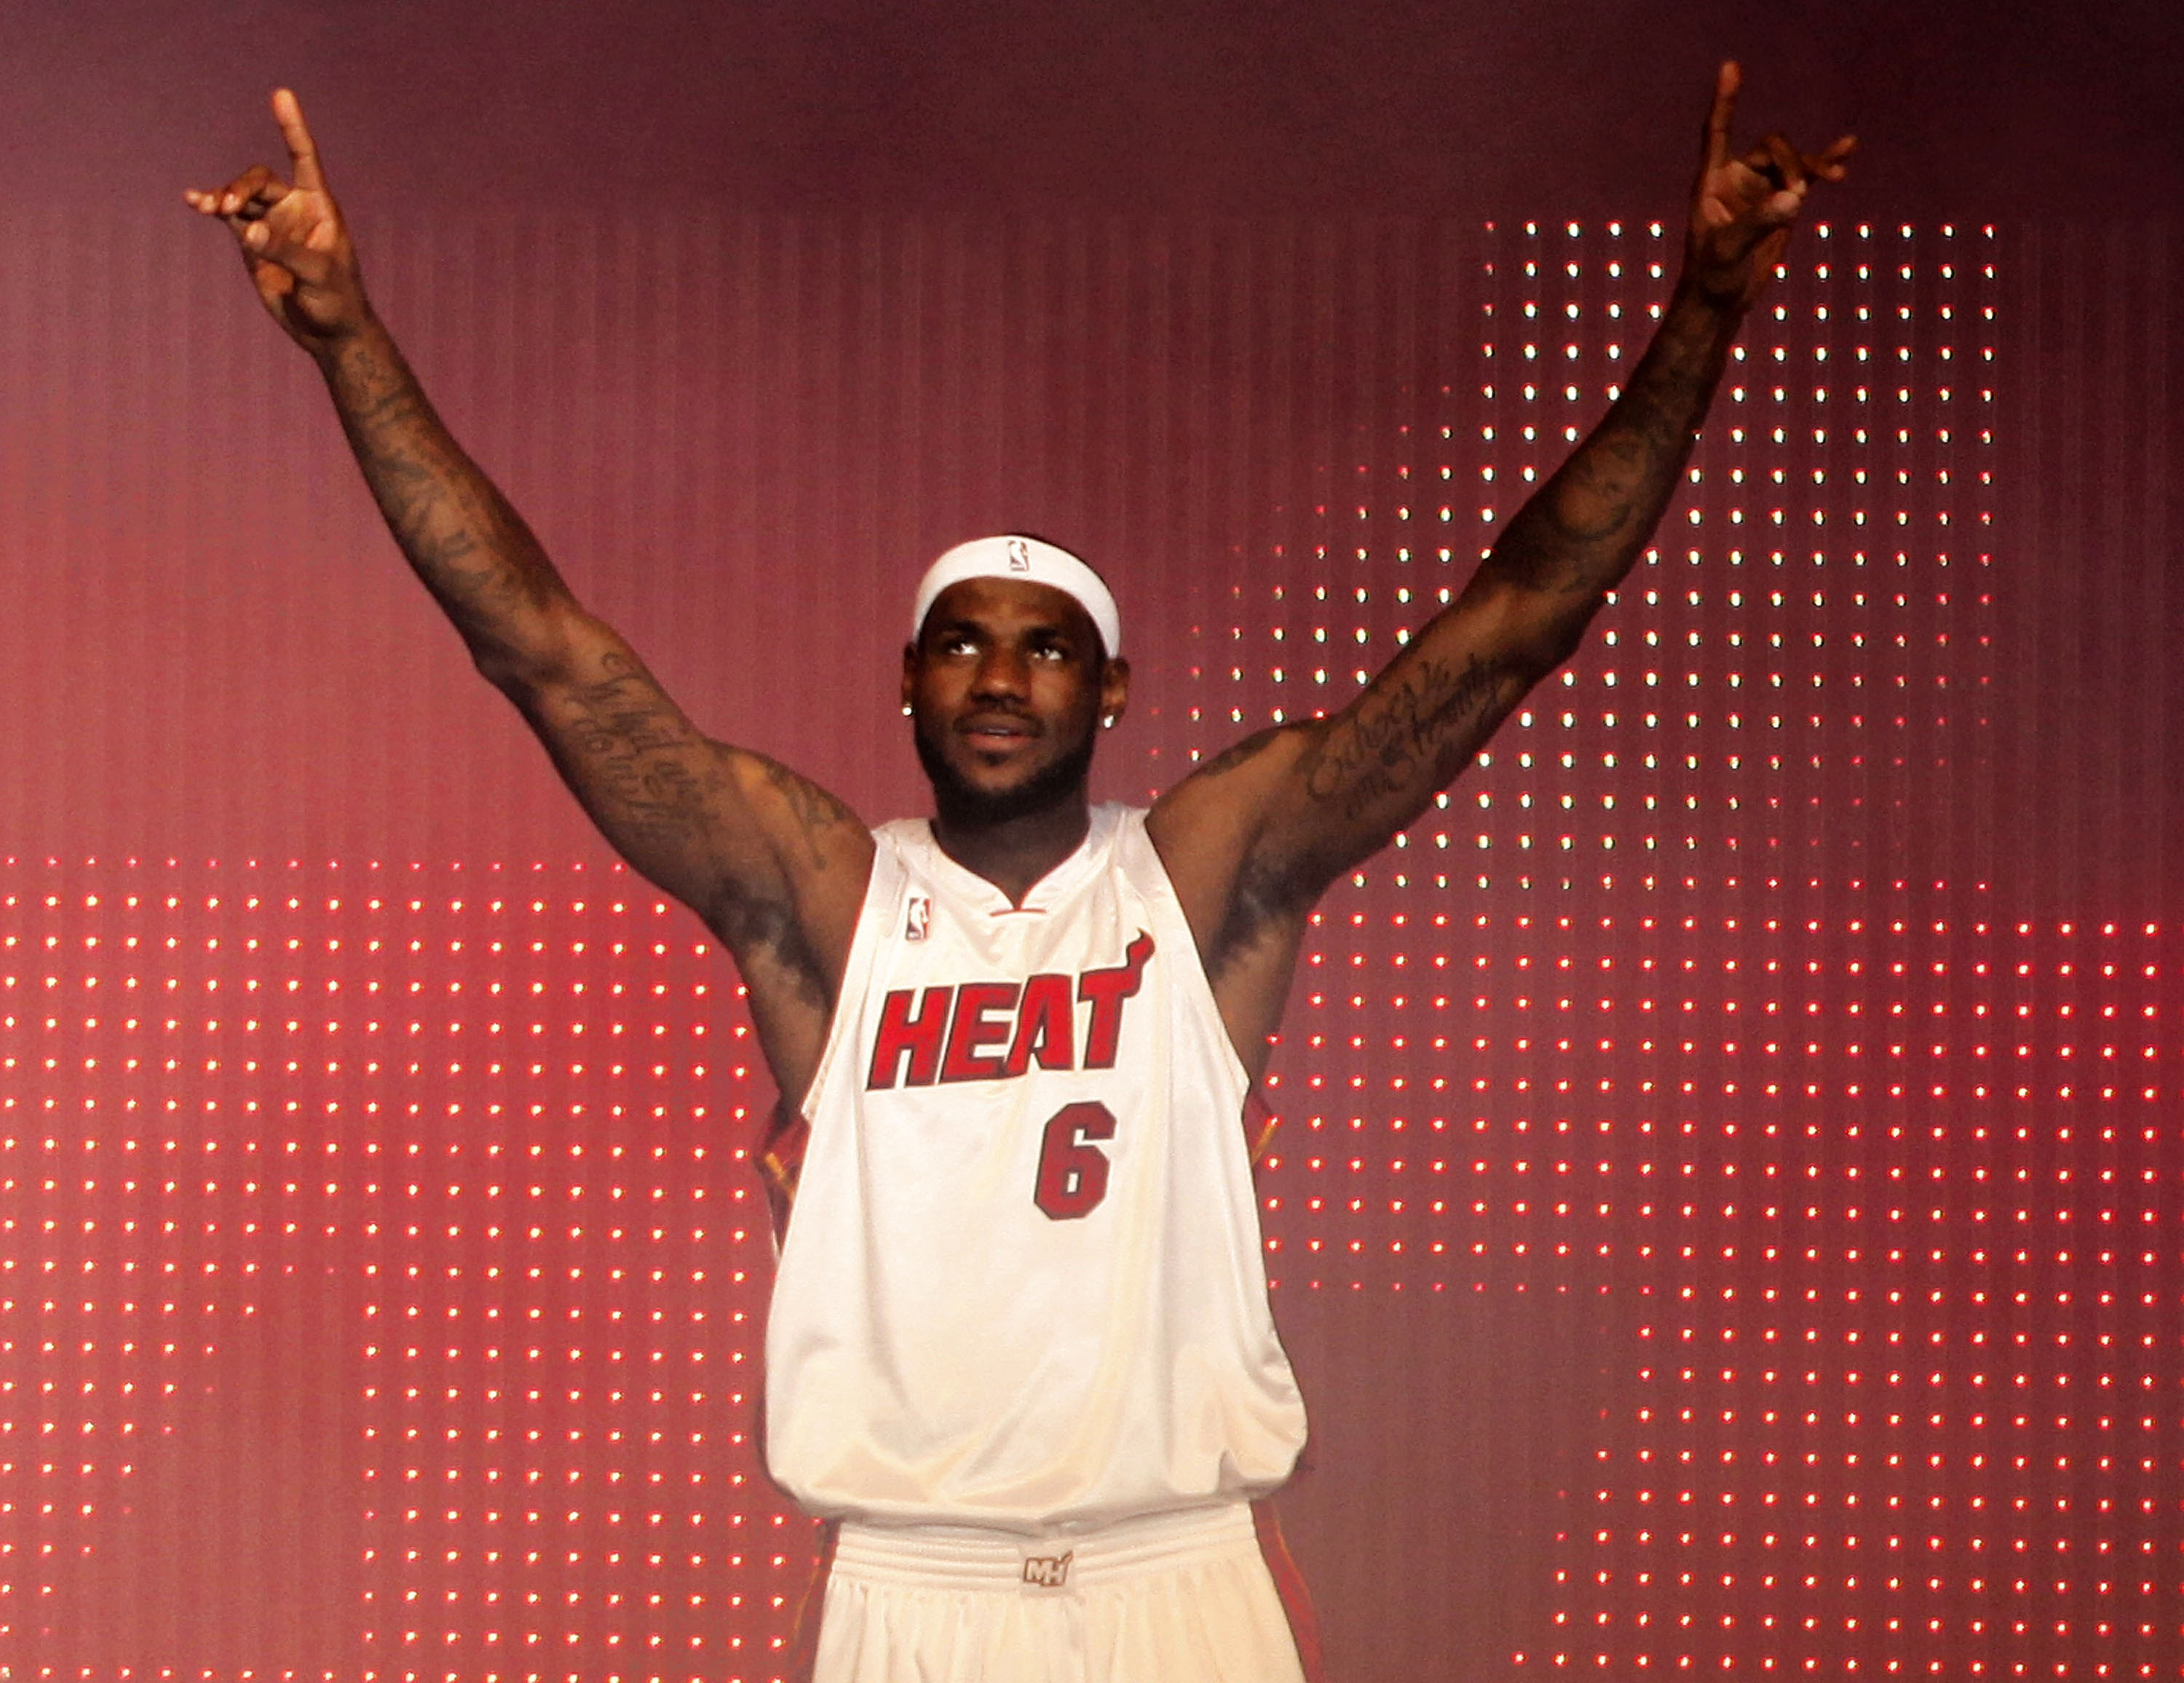 When LeBron returns to Cleveland wearing this jersey, things might get a little heated.